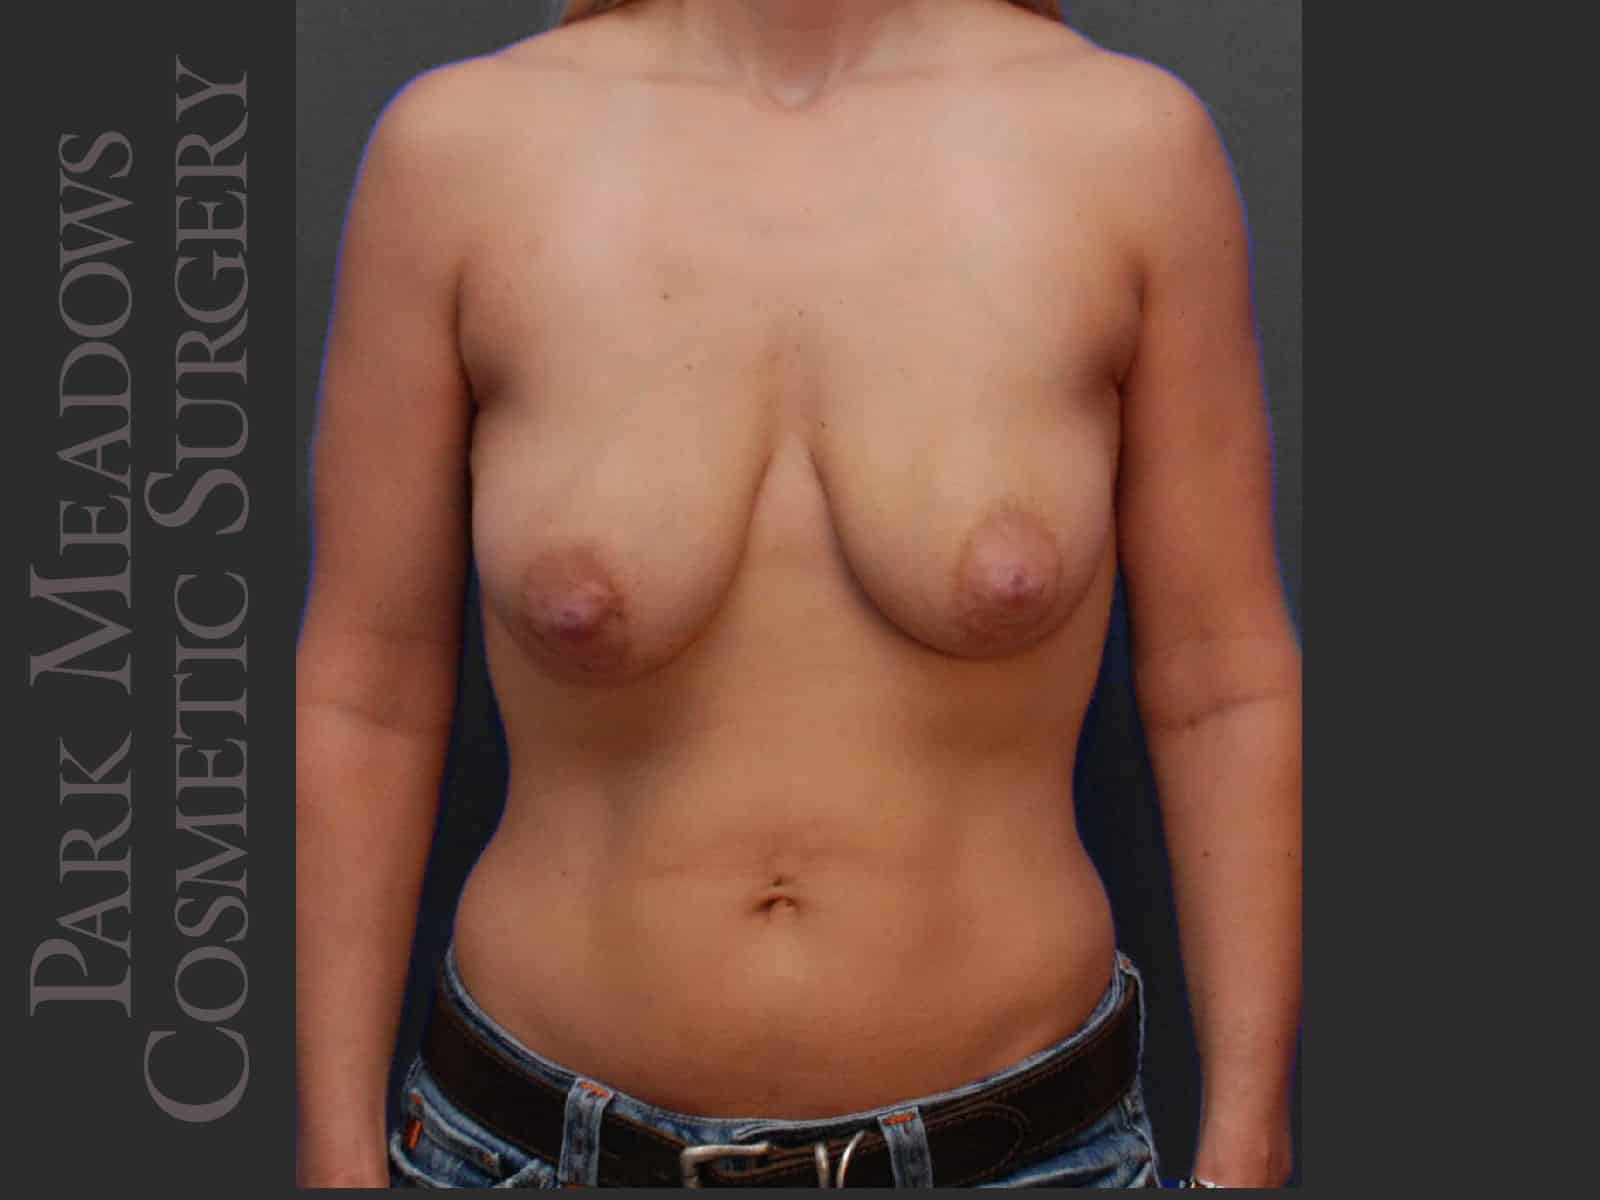 Bilateral mastectomy with tissue expanders; silicone implant exchange; one fat grafting session with nipple reconstruction; areola pigmentation